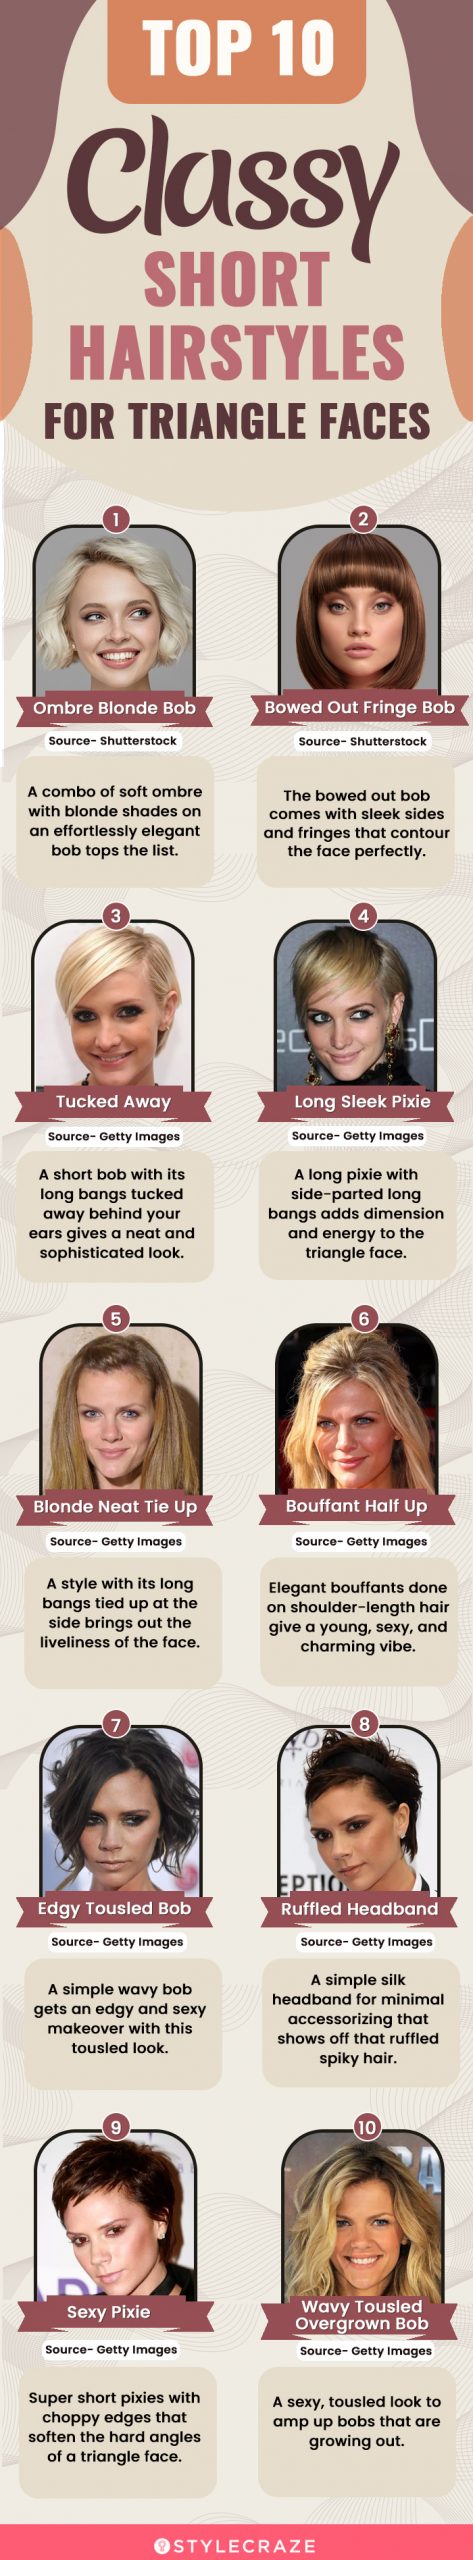 top 10 classy short hairstyles for triangle faces (infographic)